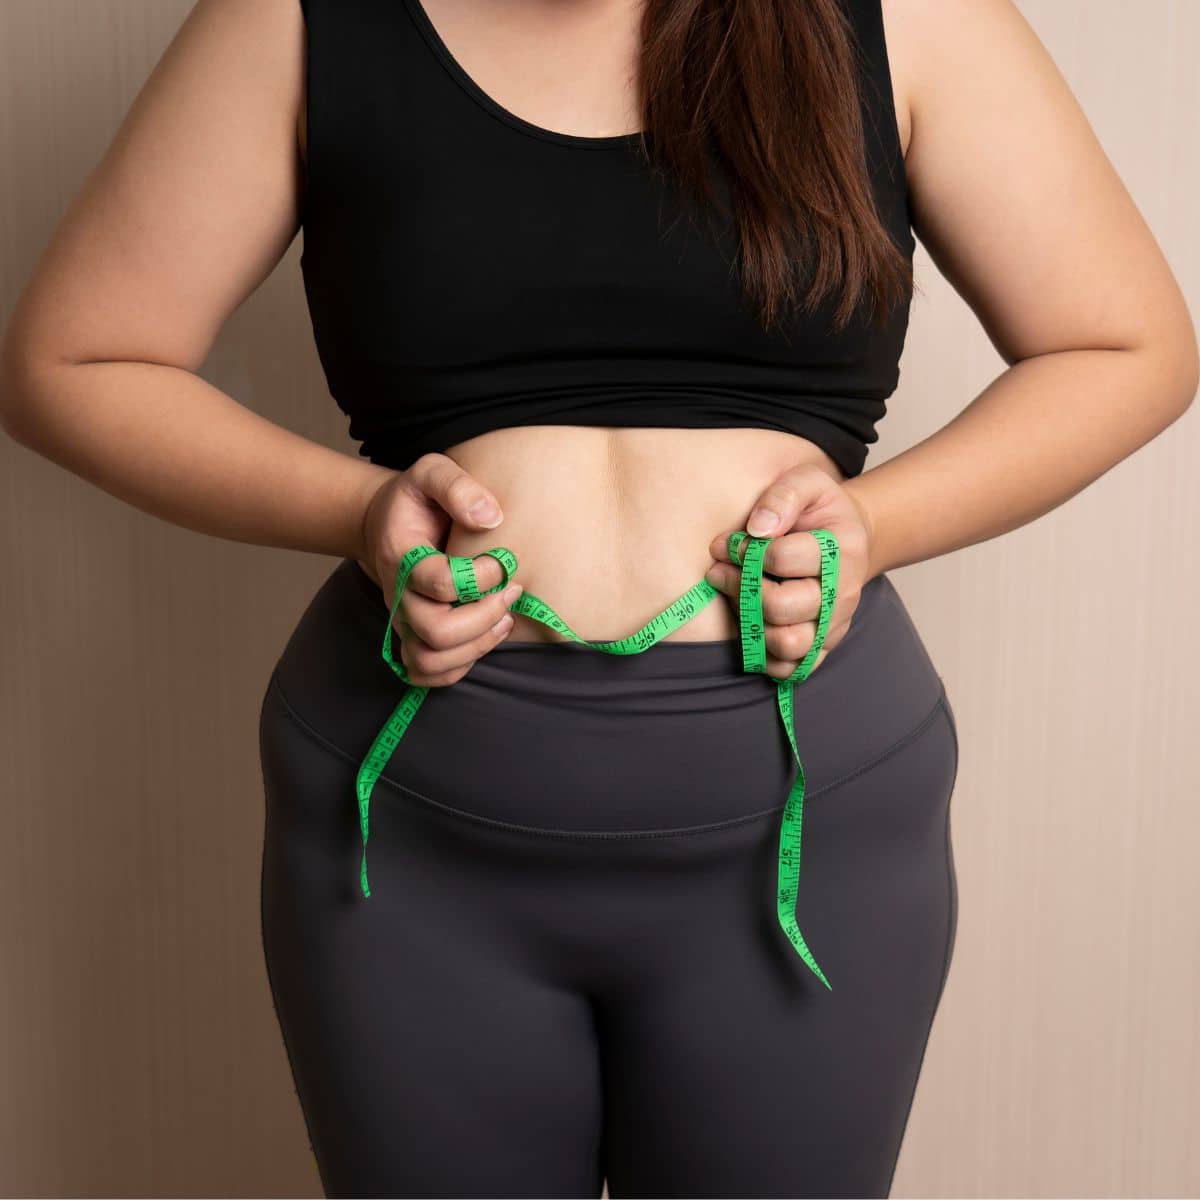 How to get rid of hanging belly Fat or Stomach Overhang or Apron Belly